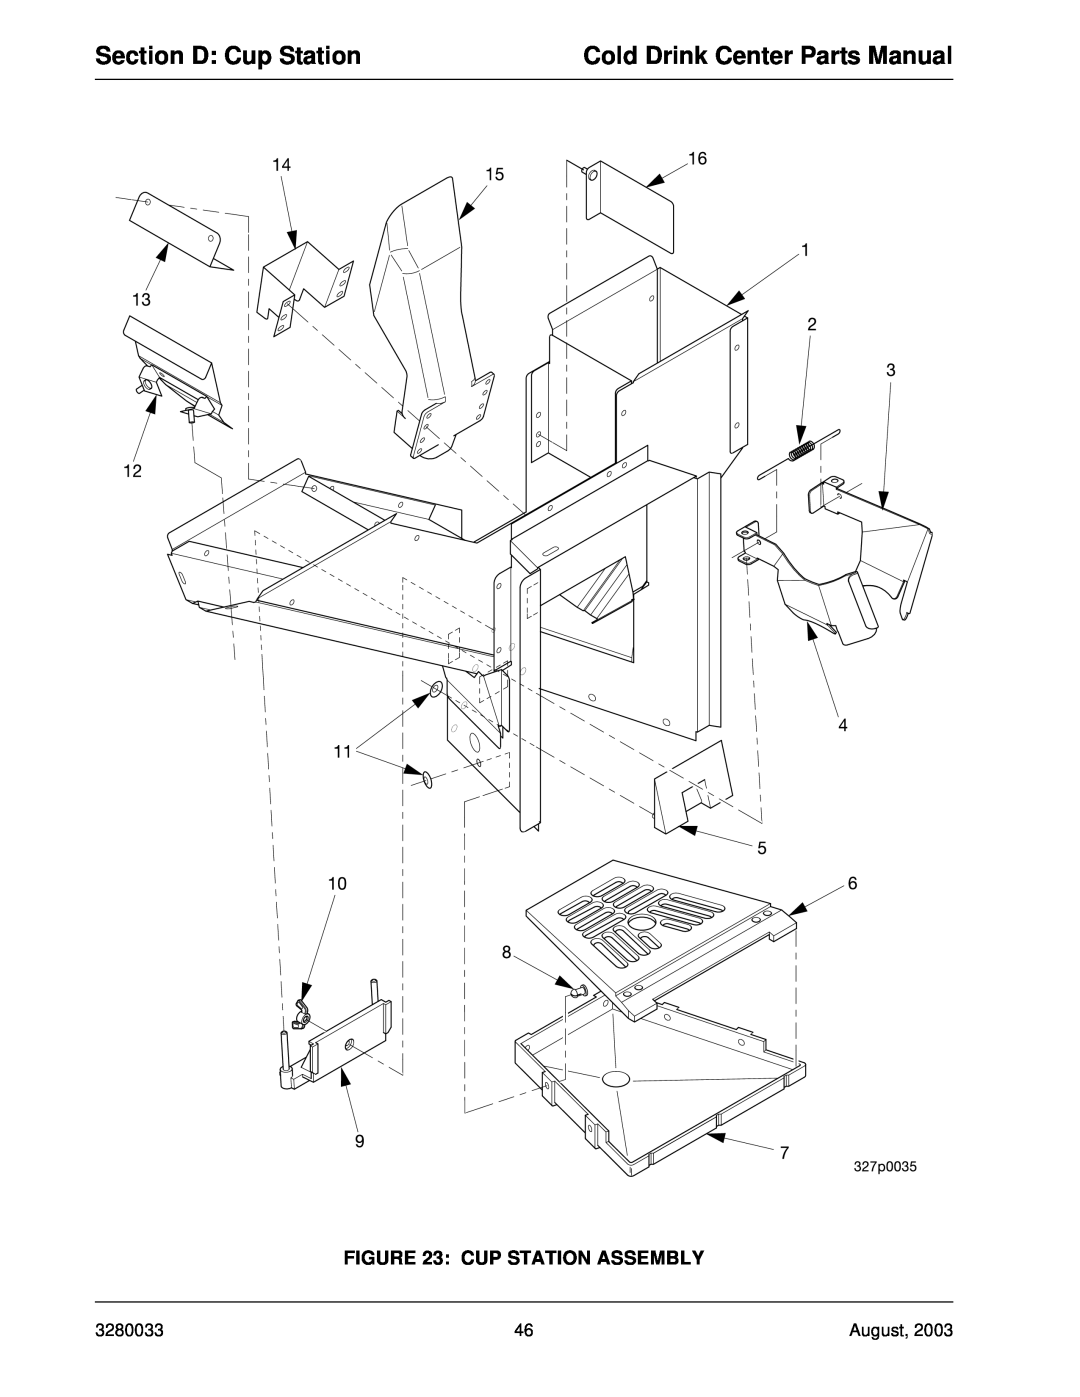 Crane Merchandising Systems 328, 327 manual Section D Cup Station, Cold Drink Center Parts Manual, Cup Station Assembly 